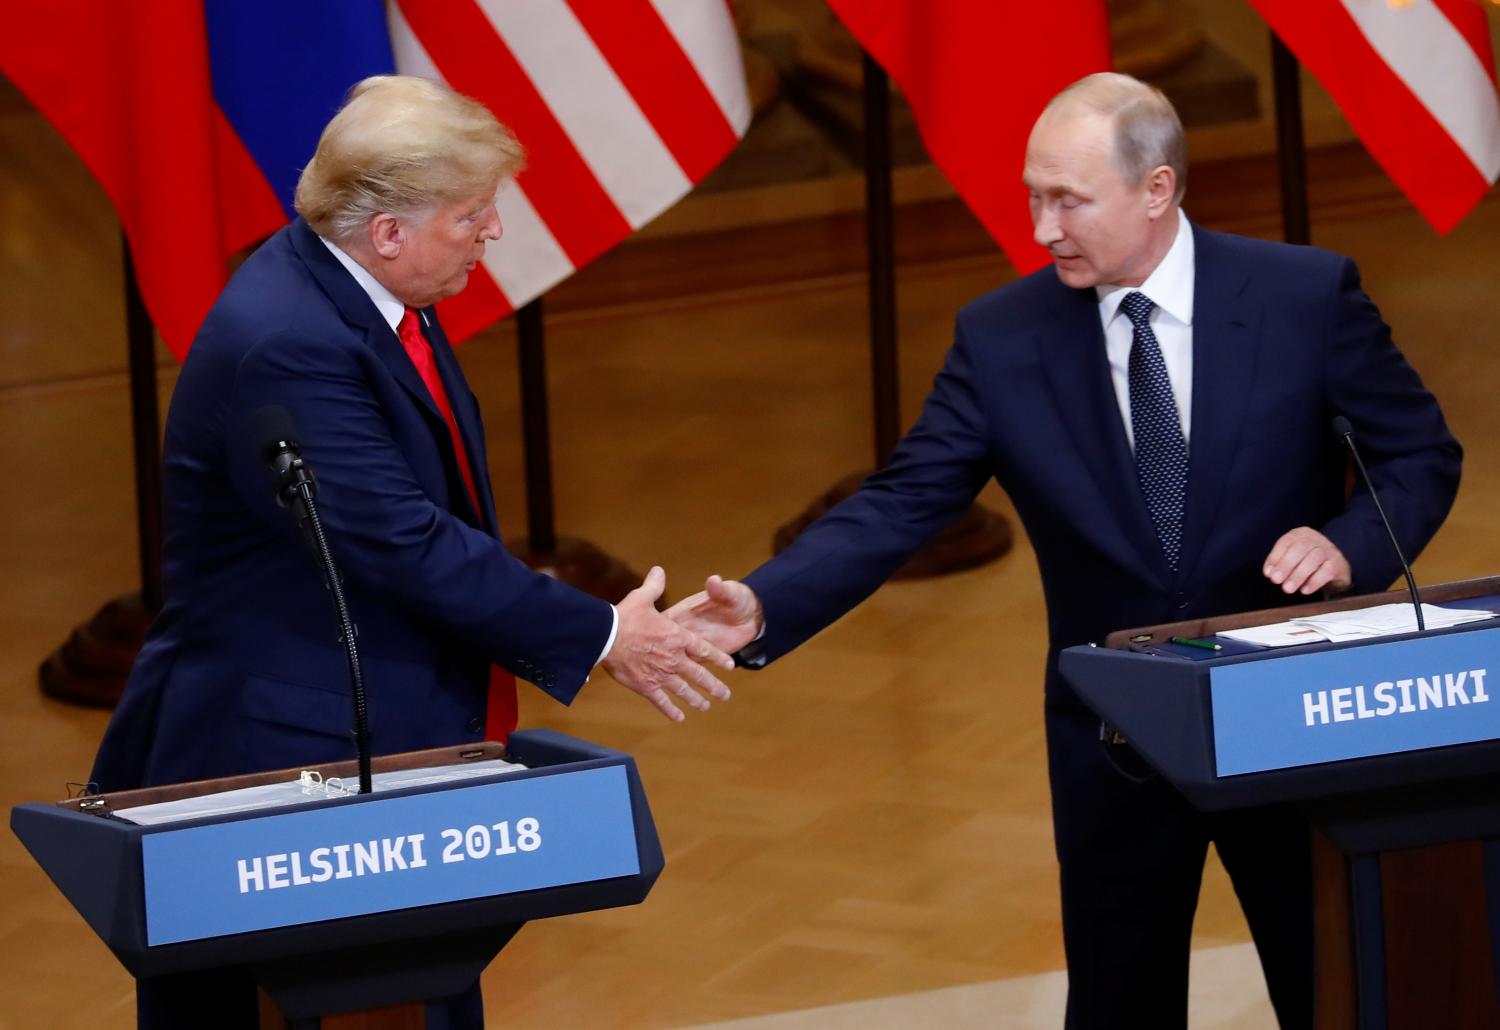 U.S. President Donald Trump and Russian President Vladimir Putin shake hands as they hold a joint news conference after their meeting in Helsinki, Finland, July 16, 2018. REUTERS/Leonhard Foeger - RC119D3EE840